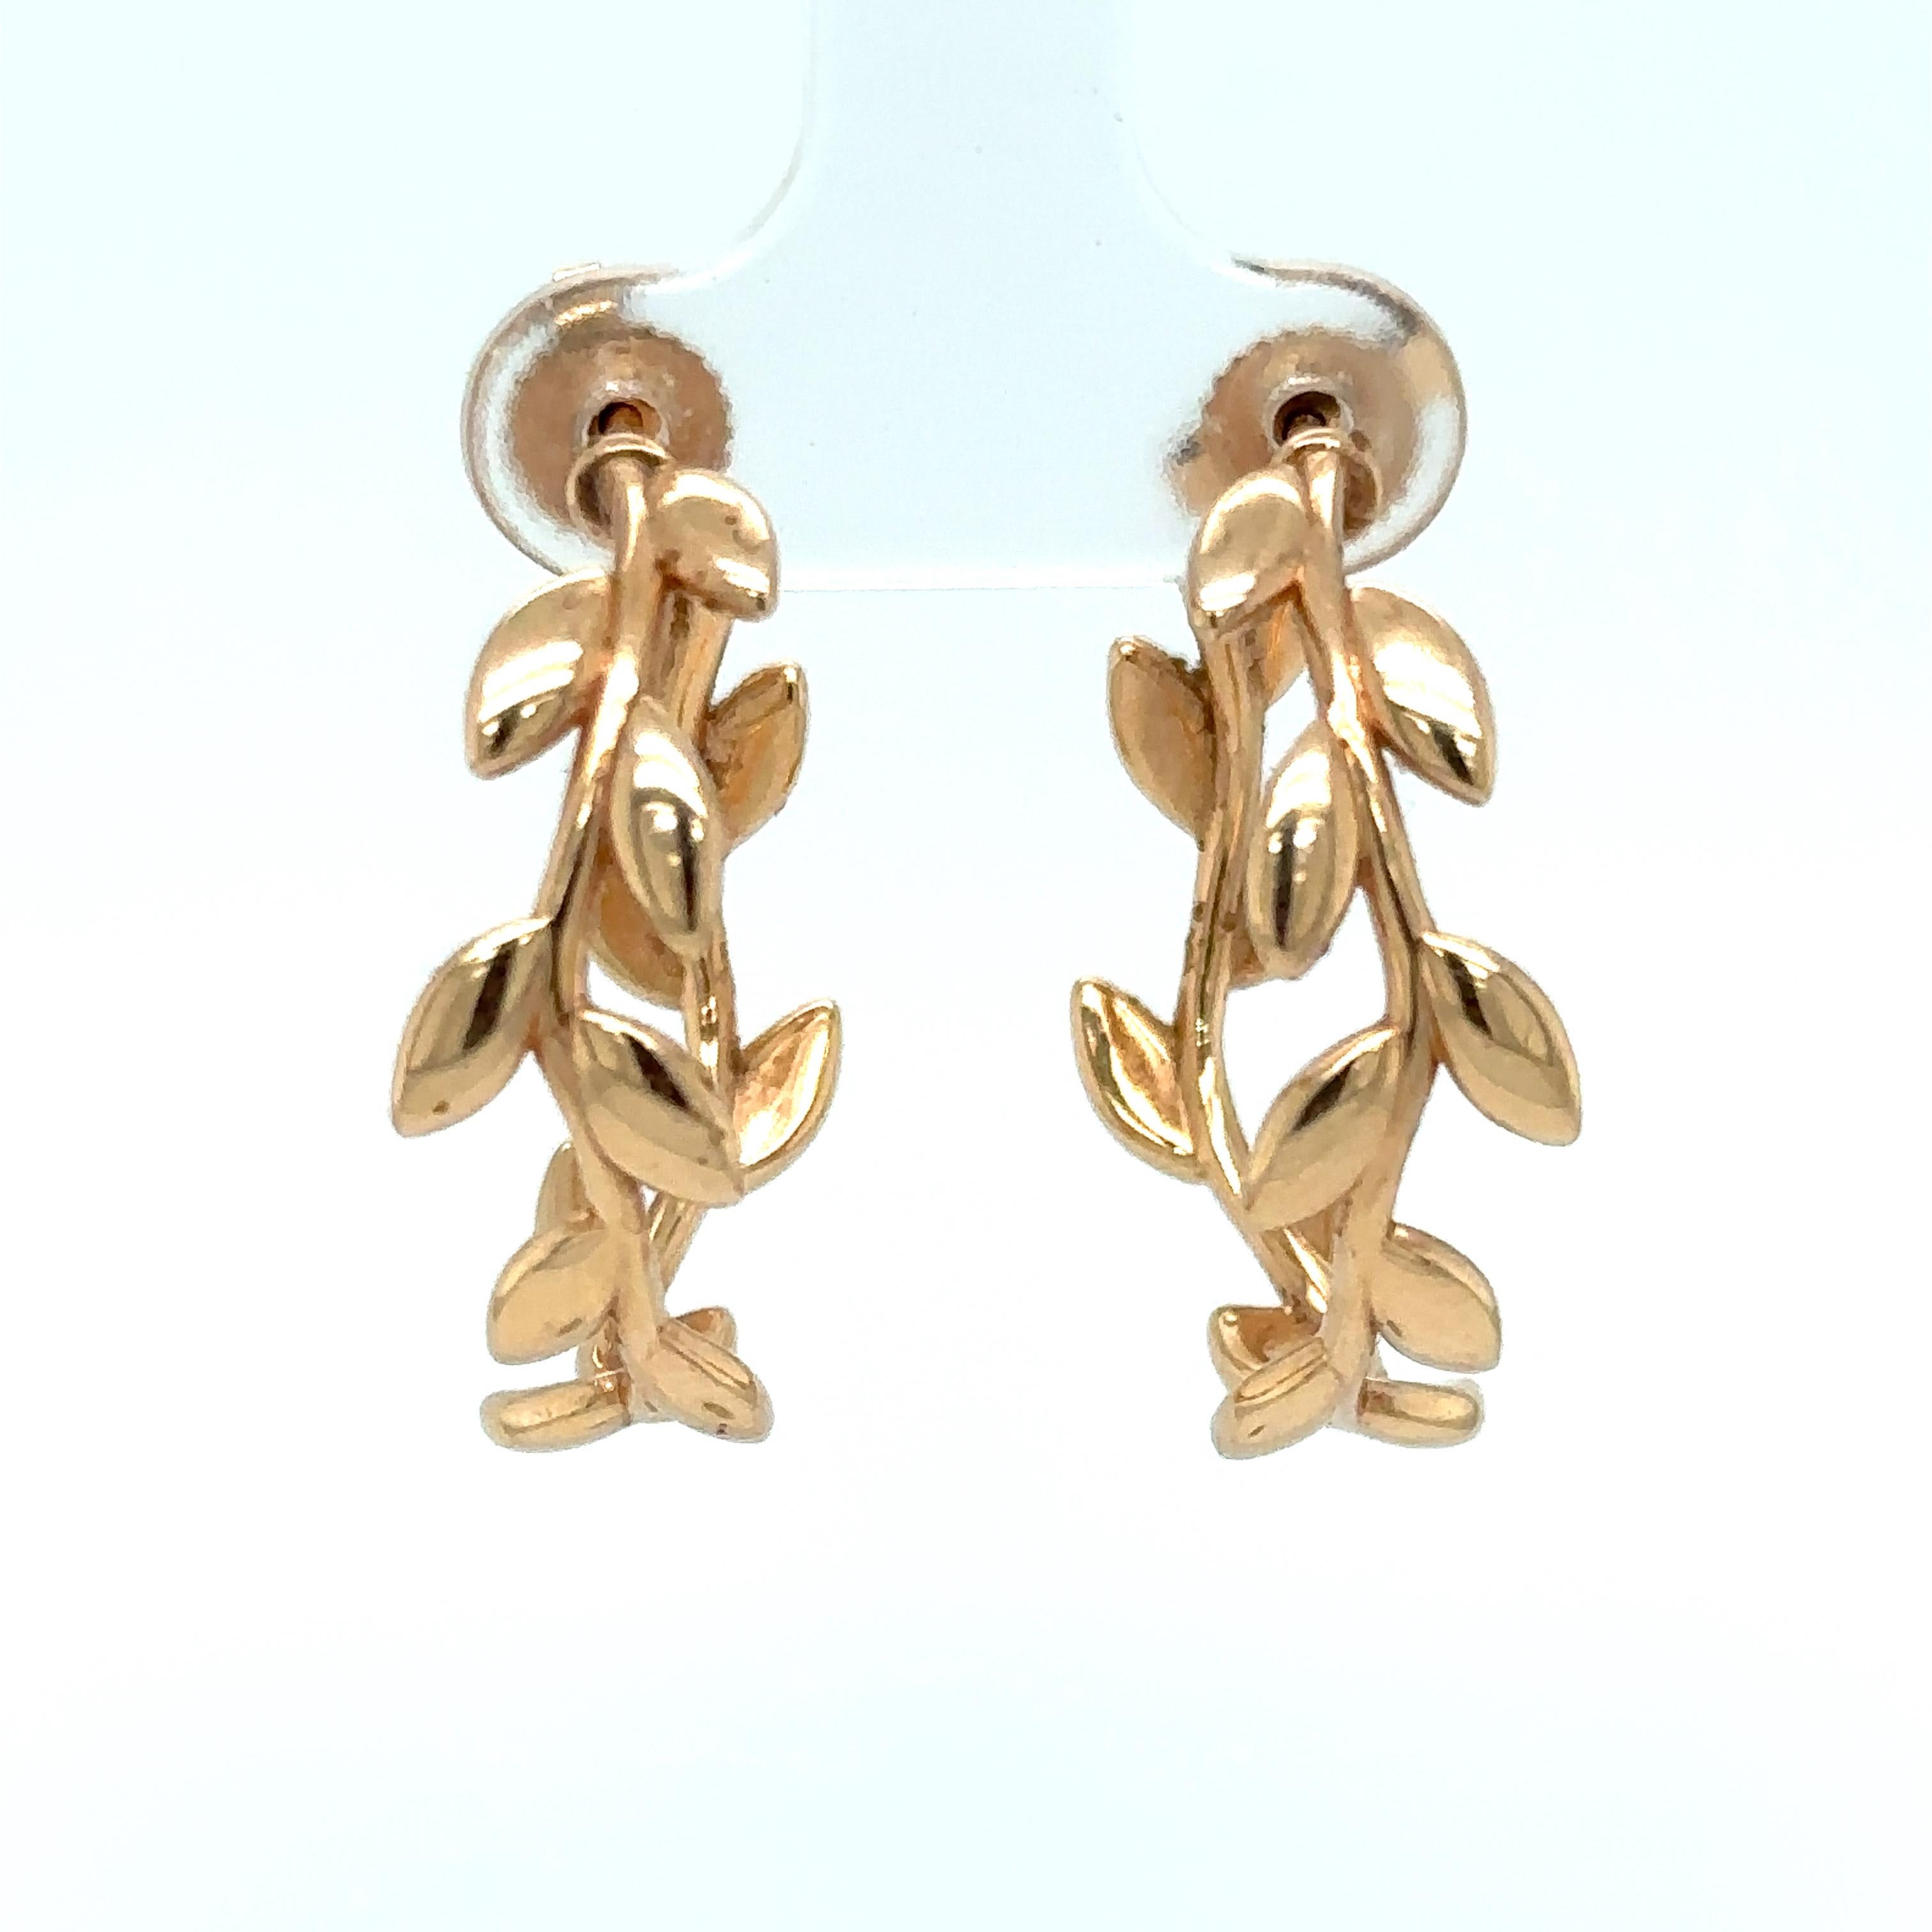 Item Details: These hoop earrings by Paloma Picasso for Tiffany & Co. have an olive leaf motif in an open hoop design. Crafted in 18 Karat Yellow Gold, they boast an impressive design! 

Circa: 2000s
Metal Type: 18 Karat Yellow Gold
Weight: 10.4